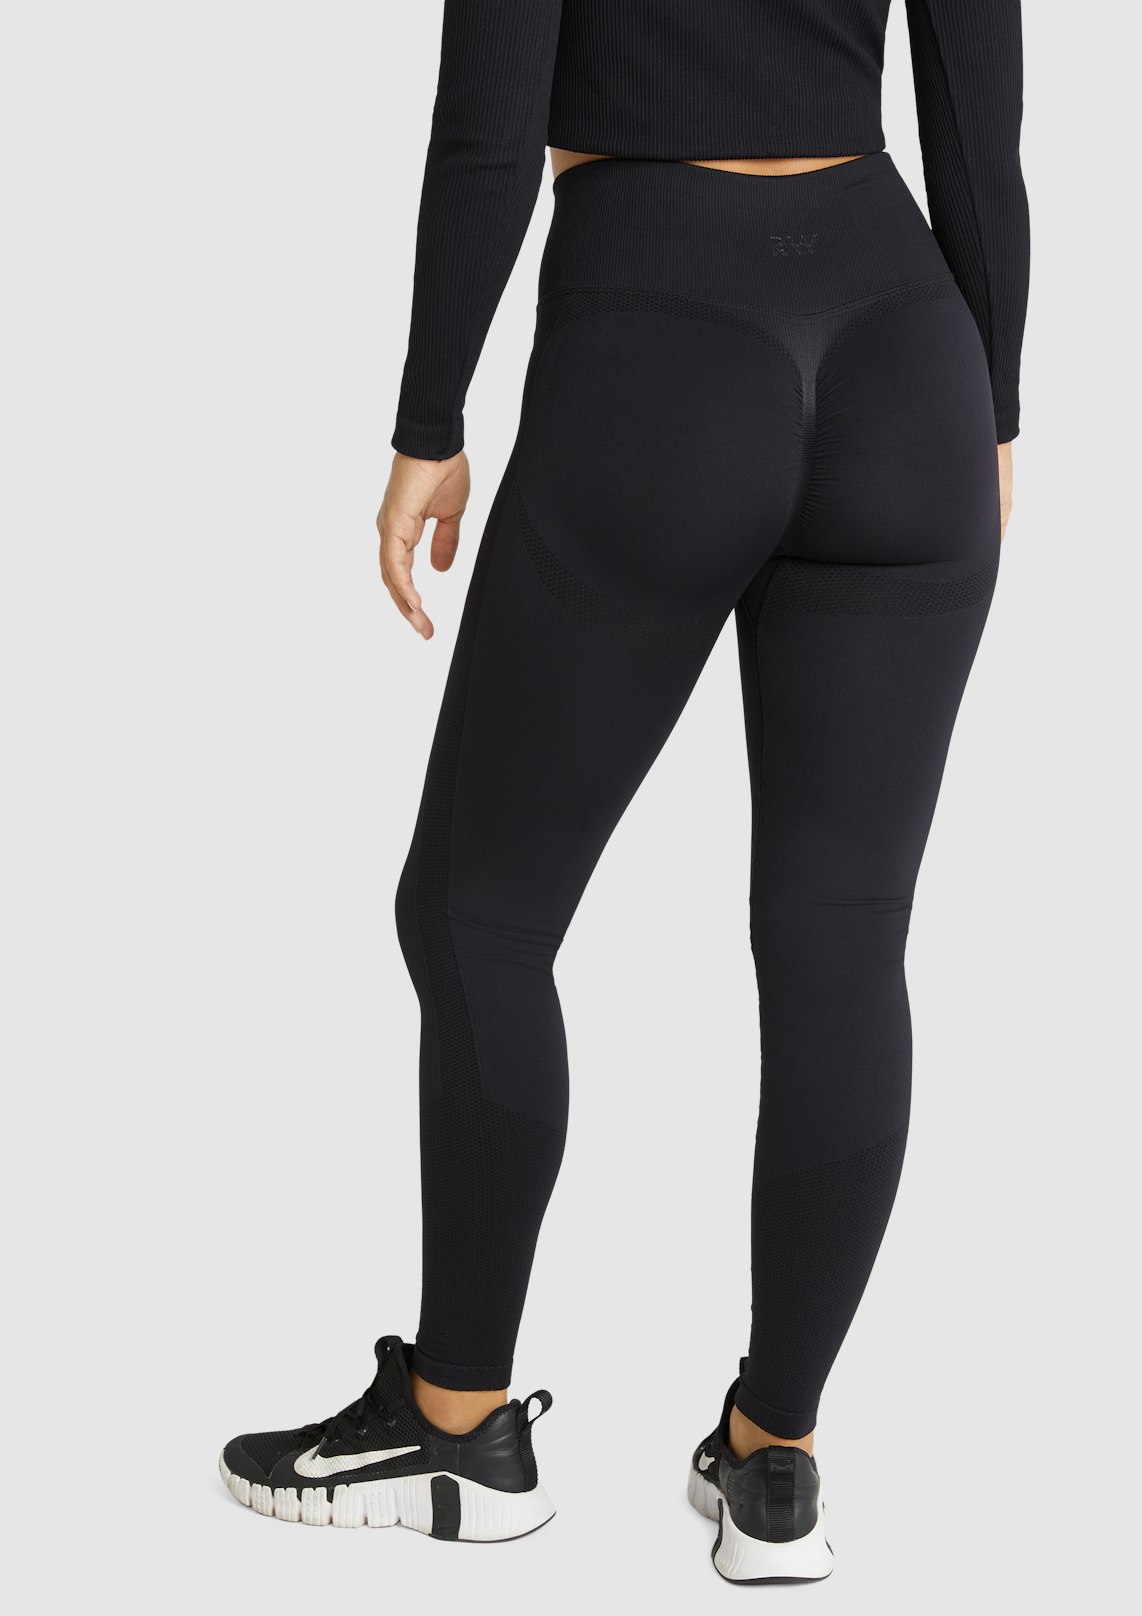 Fitness yoga leggings female seamless carry buttock of tall